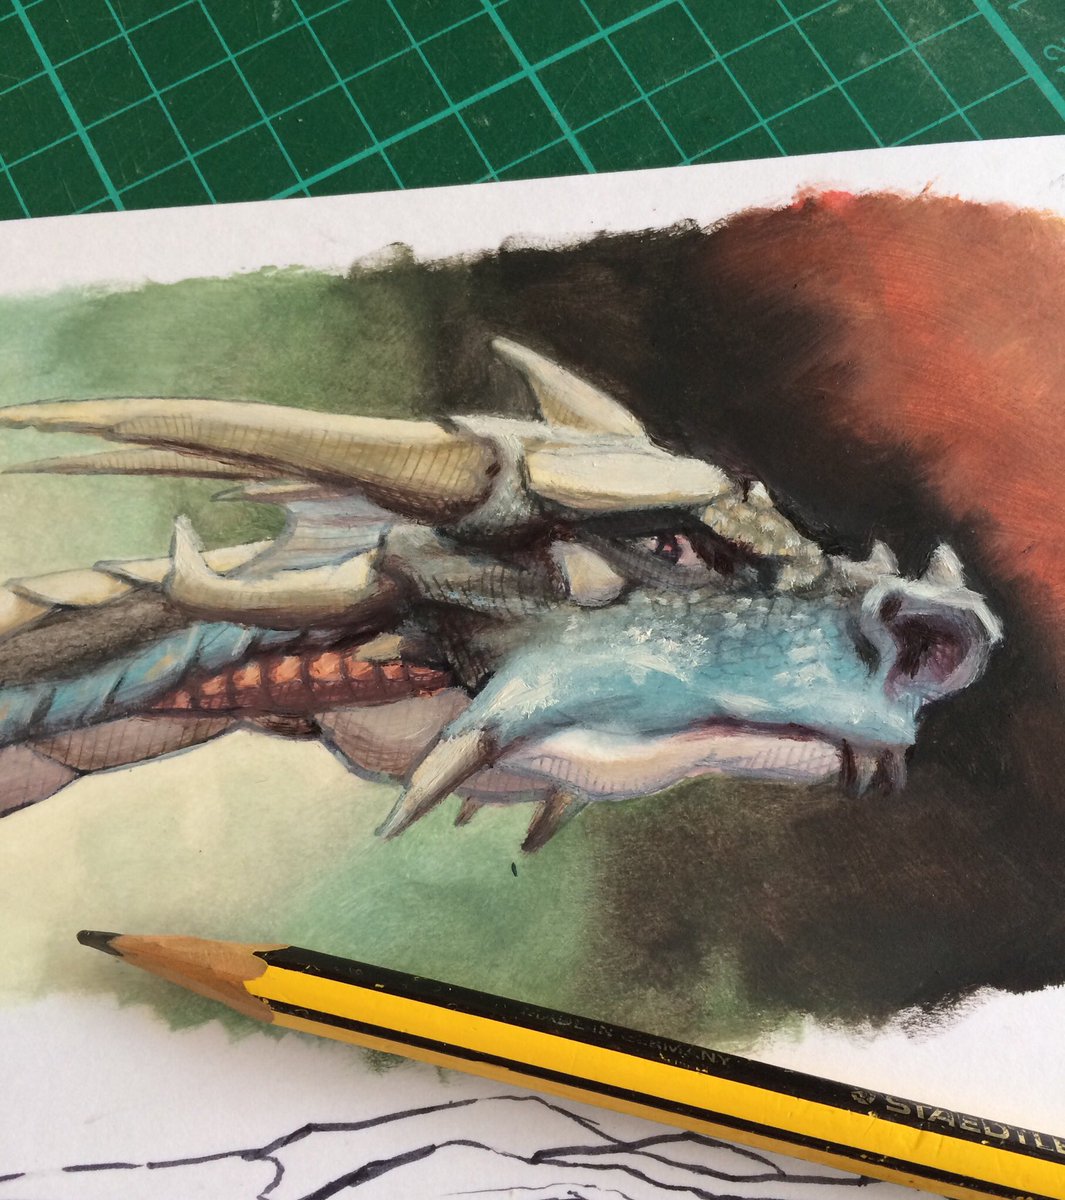 I hate wasting paint on a palette so I quickly worked up this sketch for fun
Oil on paper

#dragon #dragonsketch #oilsketch #fantasyart #fantasyillusttation #illustrator #fantasyillustrator #dragondrawing